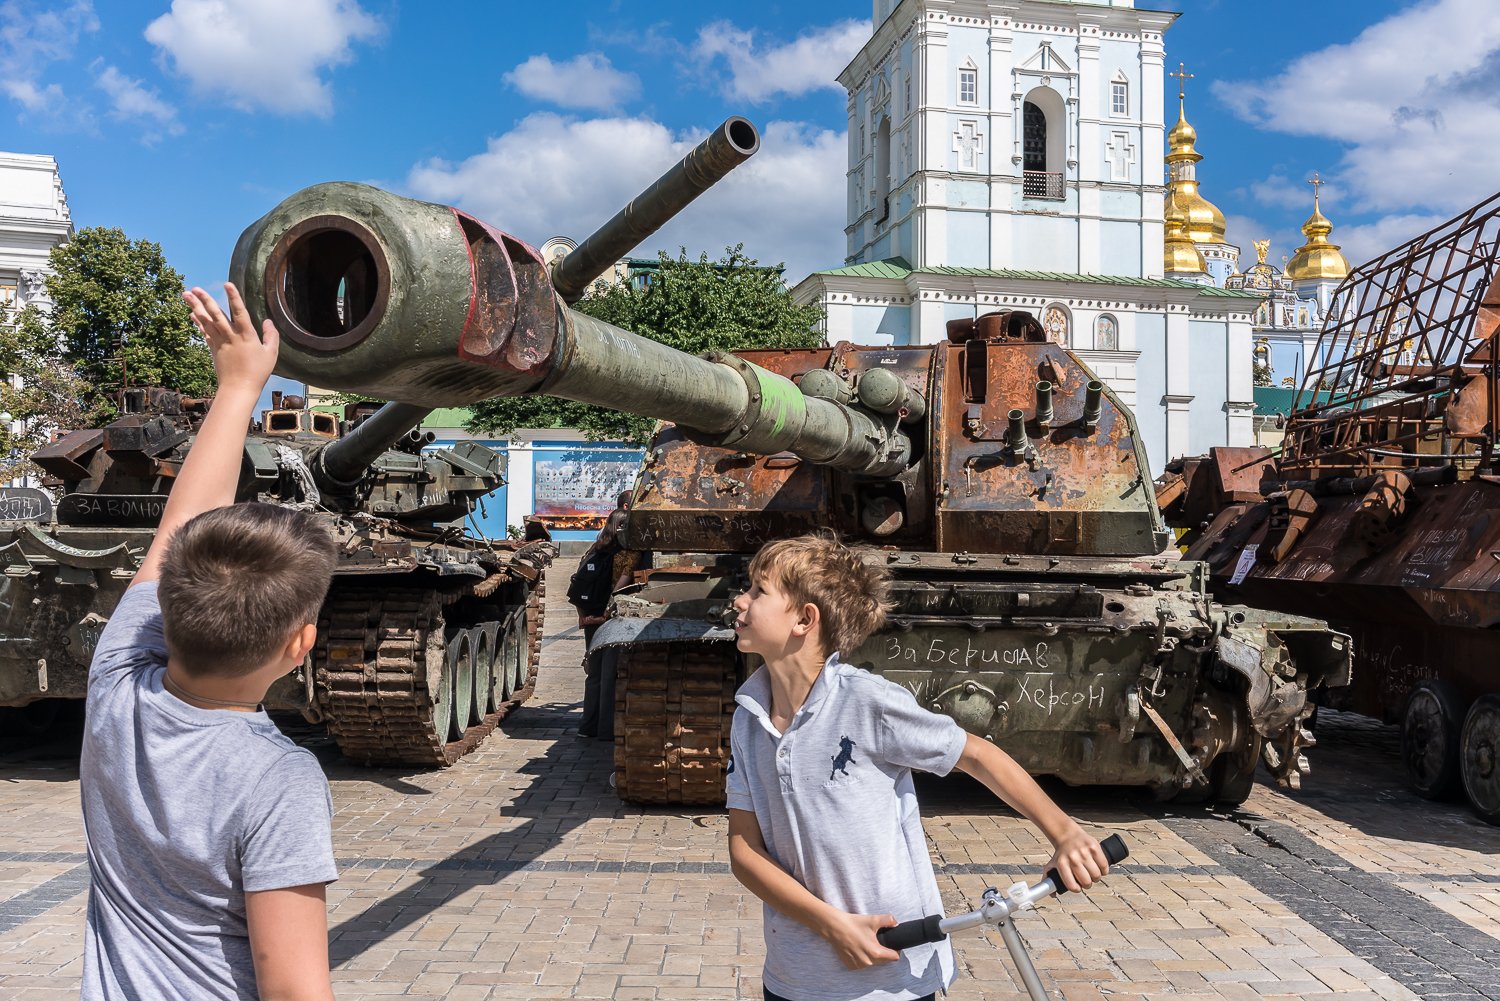  People look at destroyed Russian military equipment put on display on Mikhailivska Square outside St. Michael's Golden-Domed Monastery on Wednesday, August 31, 2022 in Kyiv, Ukraine. 